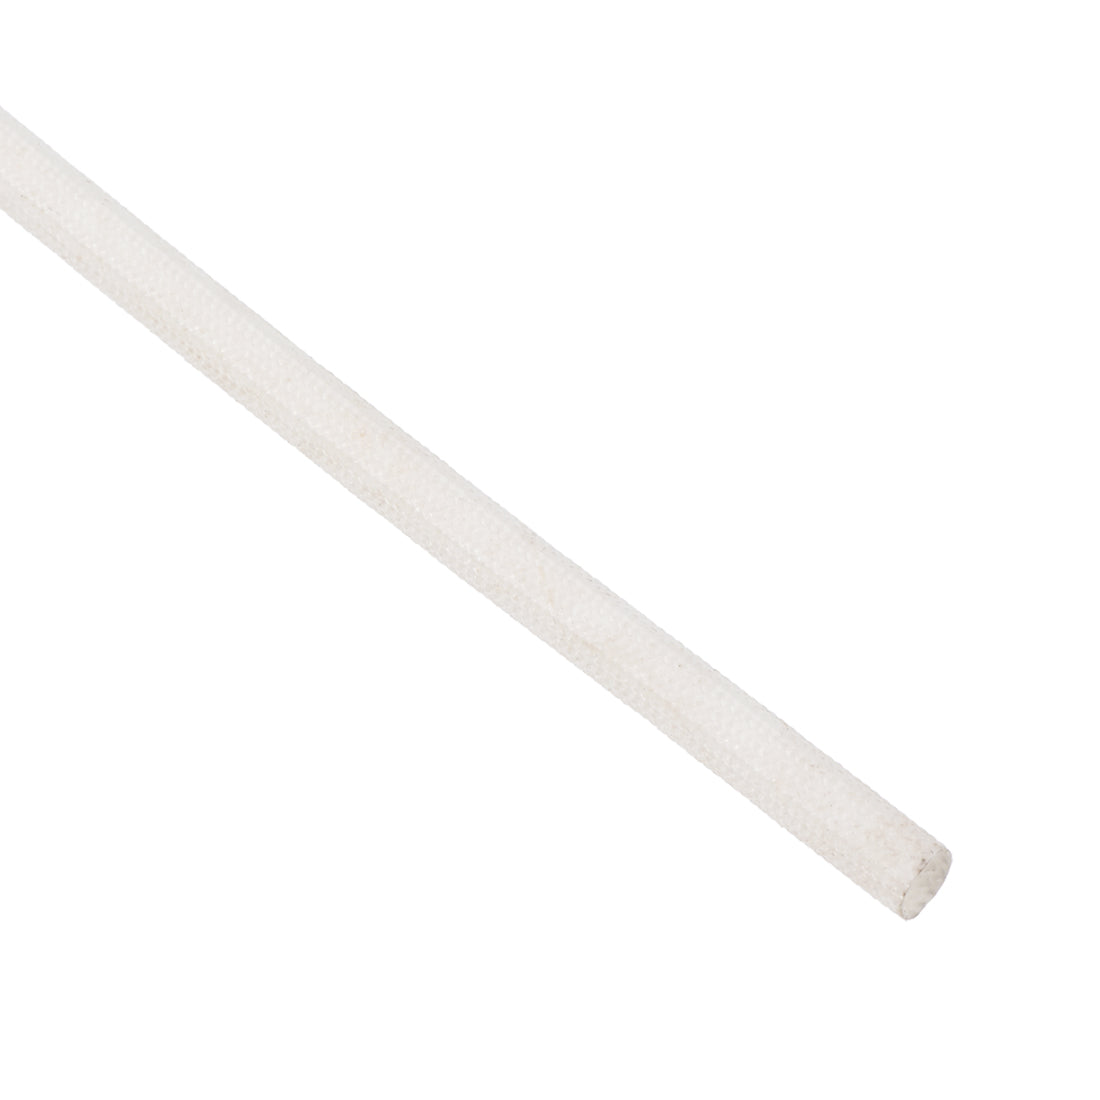 uxcell Uxcell Insulation Cable Protector, 9.8Ft-4mm High TEMP Silicone Fiberglass Sleeve White